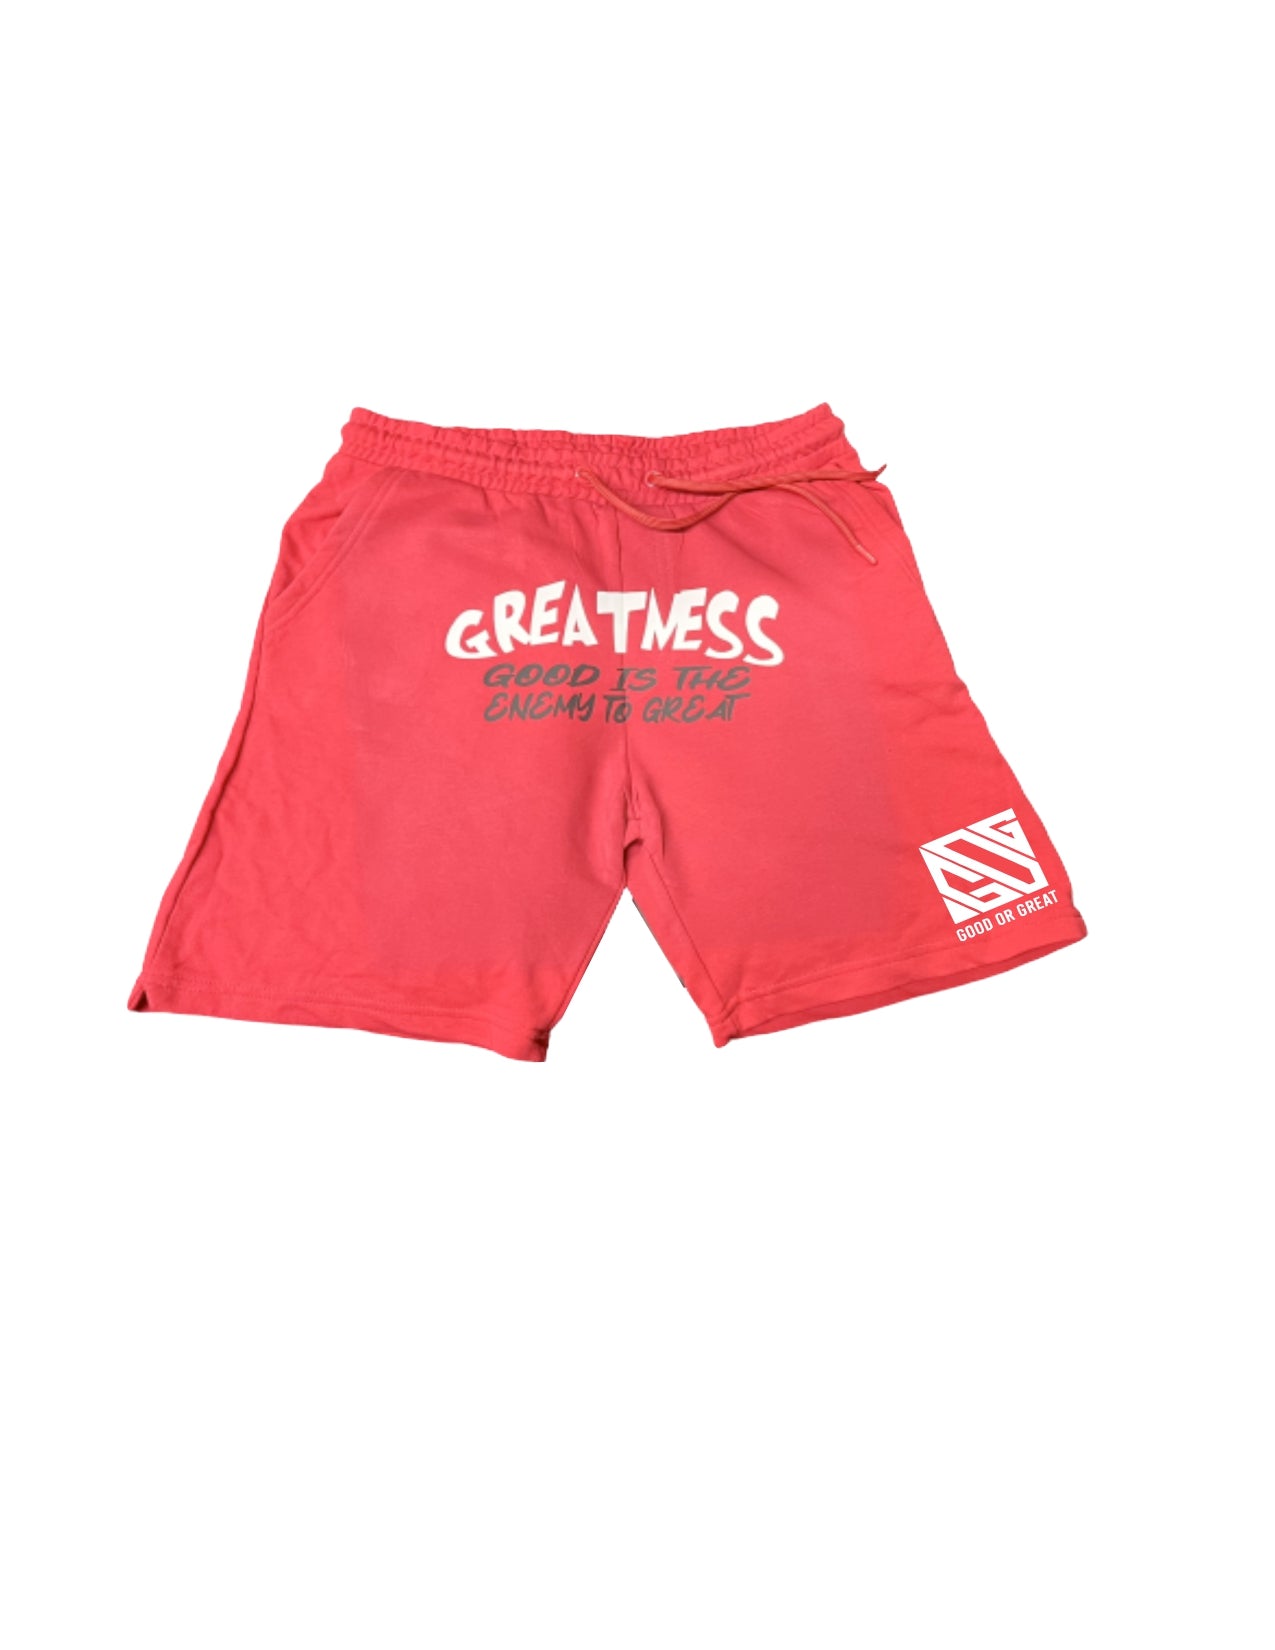 Greatness Jogger Shorts (Raging Red)